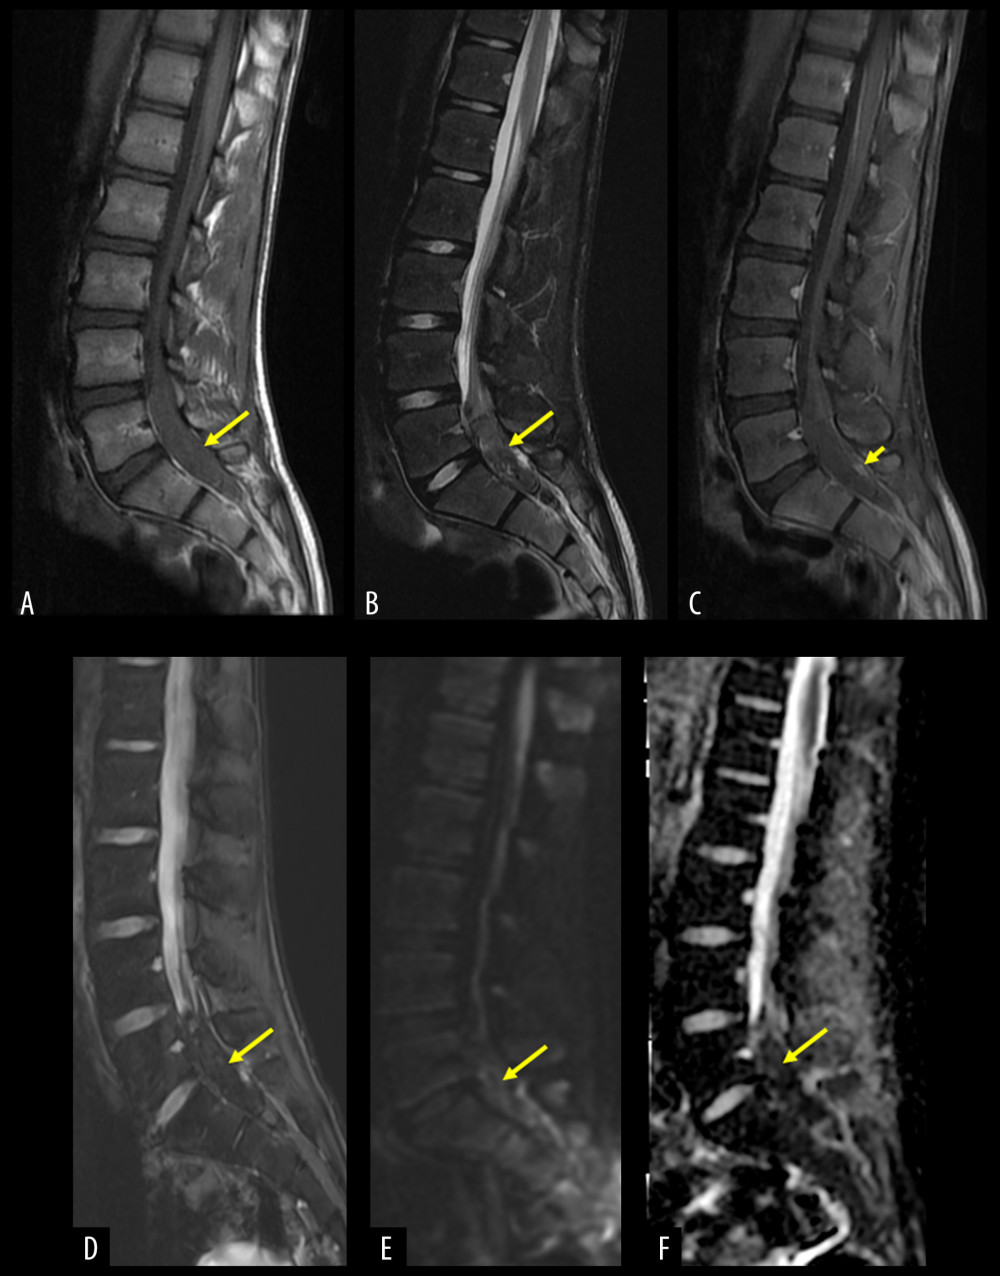 Lumbar spine magnetic resonance imaging. (A) Precontrast sagittal T1WI. (B) Fat-saturated mid-sagittal T2WI. (C) Postcontrast midsagittal T1WI. An intradural lesion can be seen at the levels of L5, S1, and S2. The lesion is isointense on T1WI and heterogeneously hypointense on T2WI. Postcontrast images showed a lack of enhancement except for an enhancing focus at the posterior aspect of the lesion. (D) T2 * sequence showed blooming artifacts indicating hemorrhagic content within the lesion. (E, F) Diffusion-weighted and apparent diffusion coefficient (ADC) sequences showed the corresponding heterogeneous diffusion restriction.